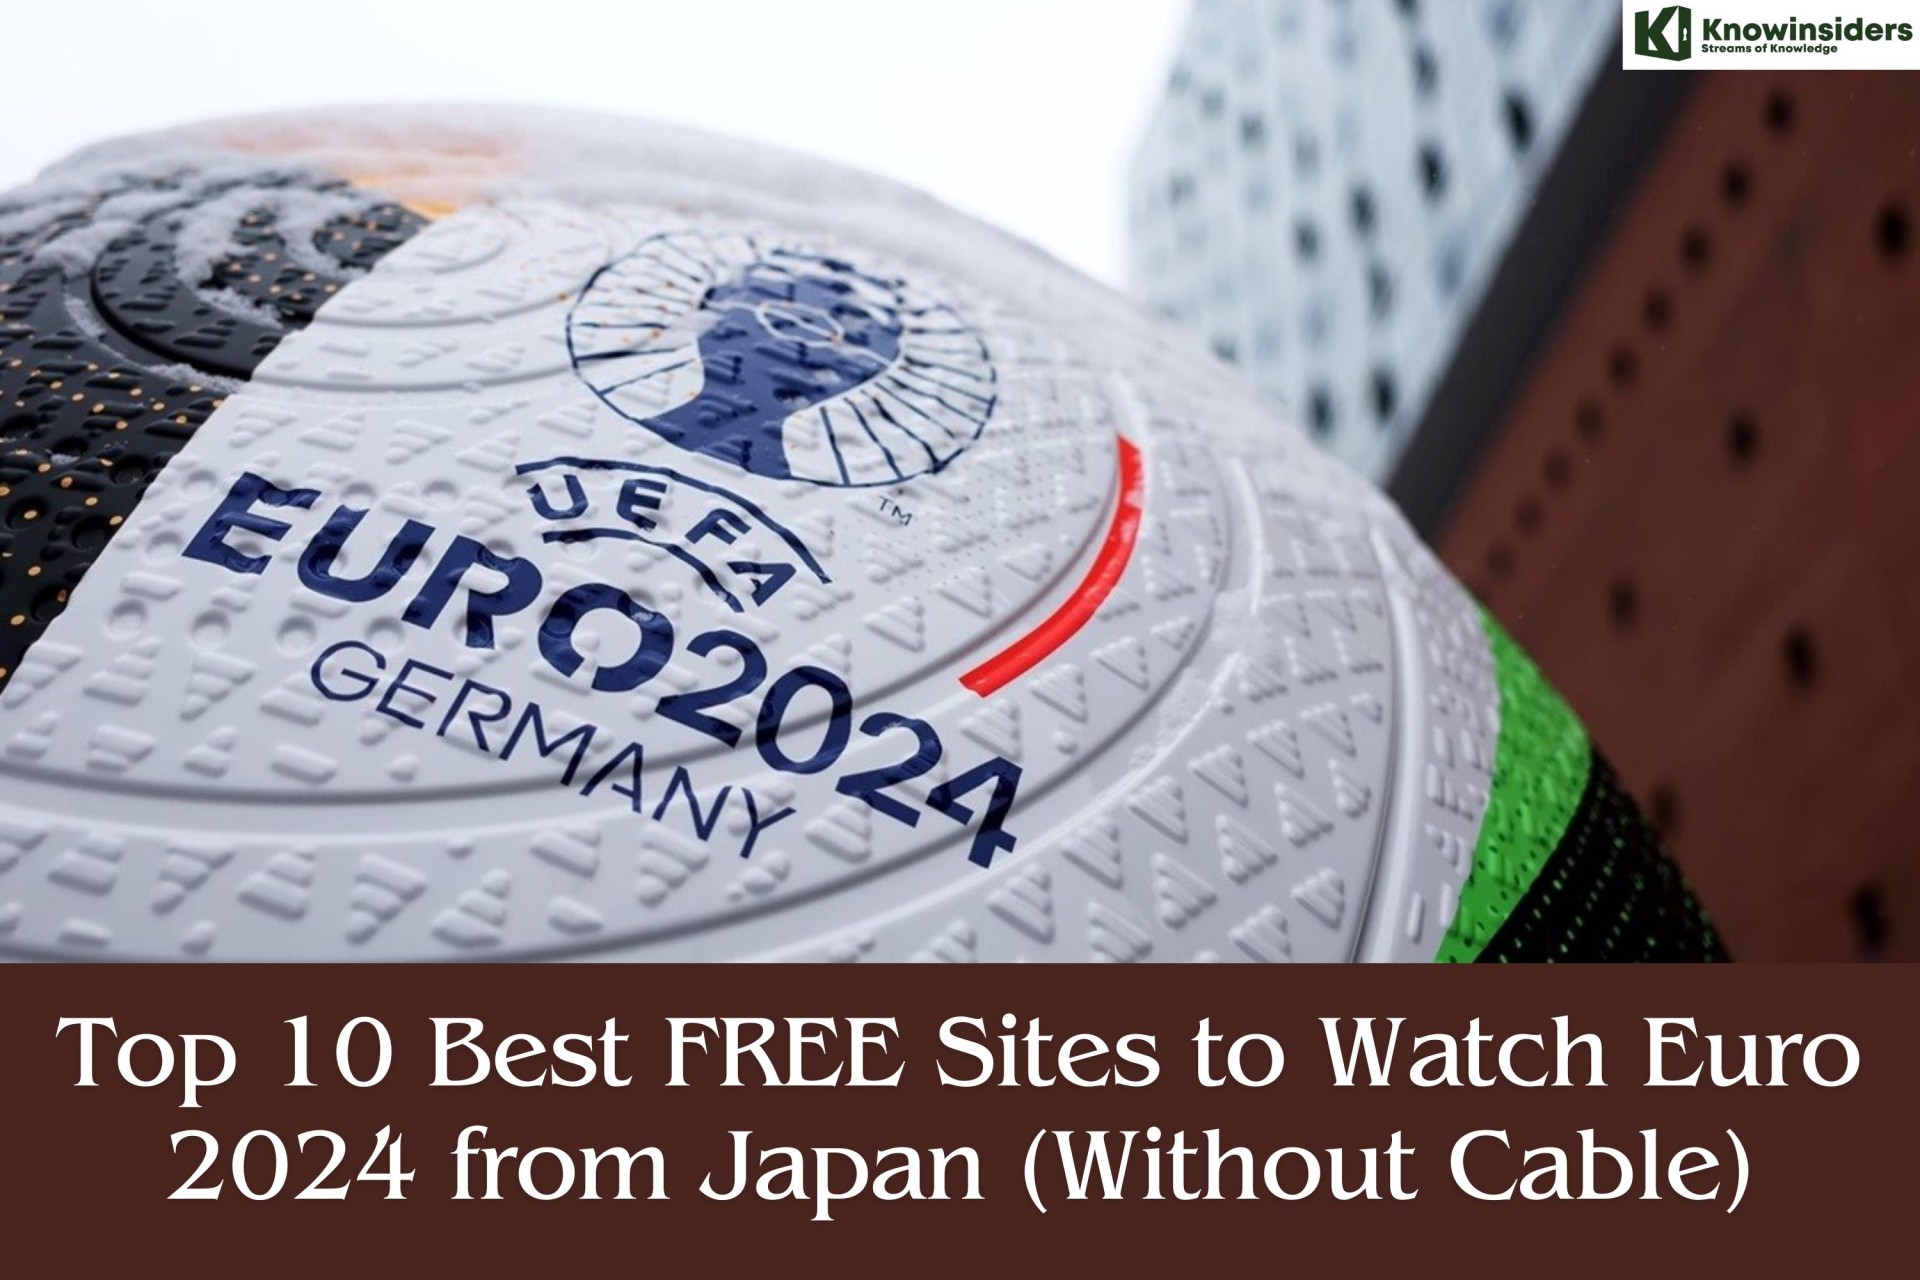 10 Best FREE Sites to Watch Euro 2024 in Japan (Without Cable)